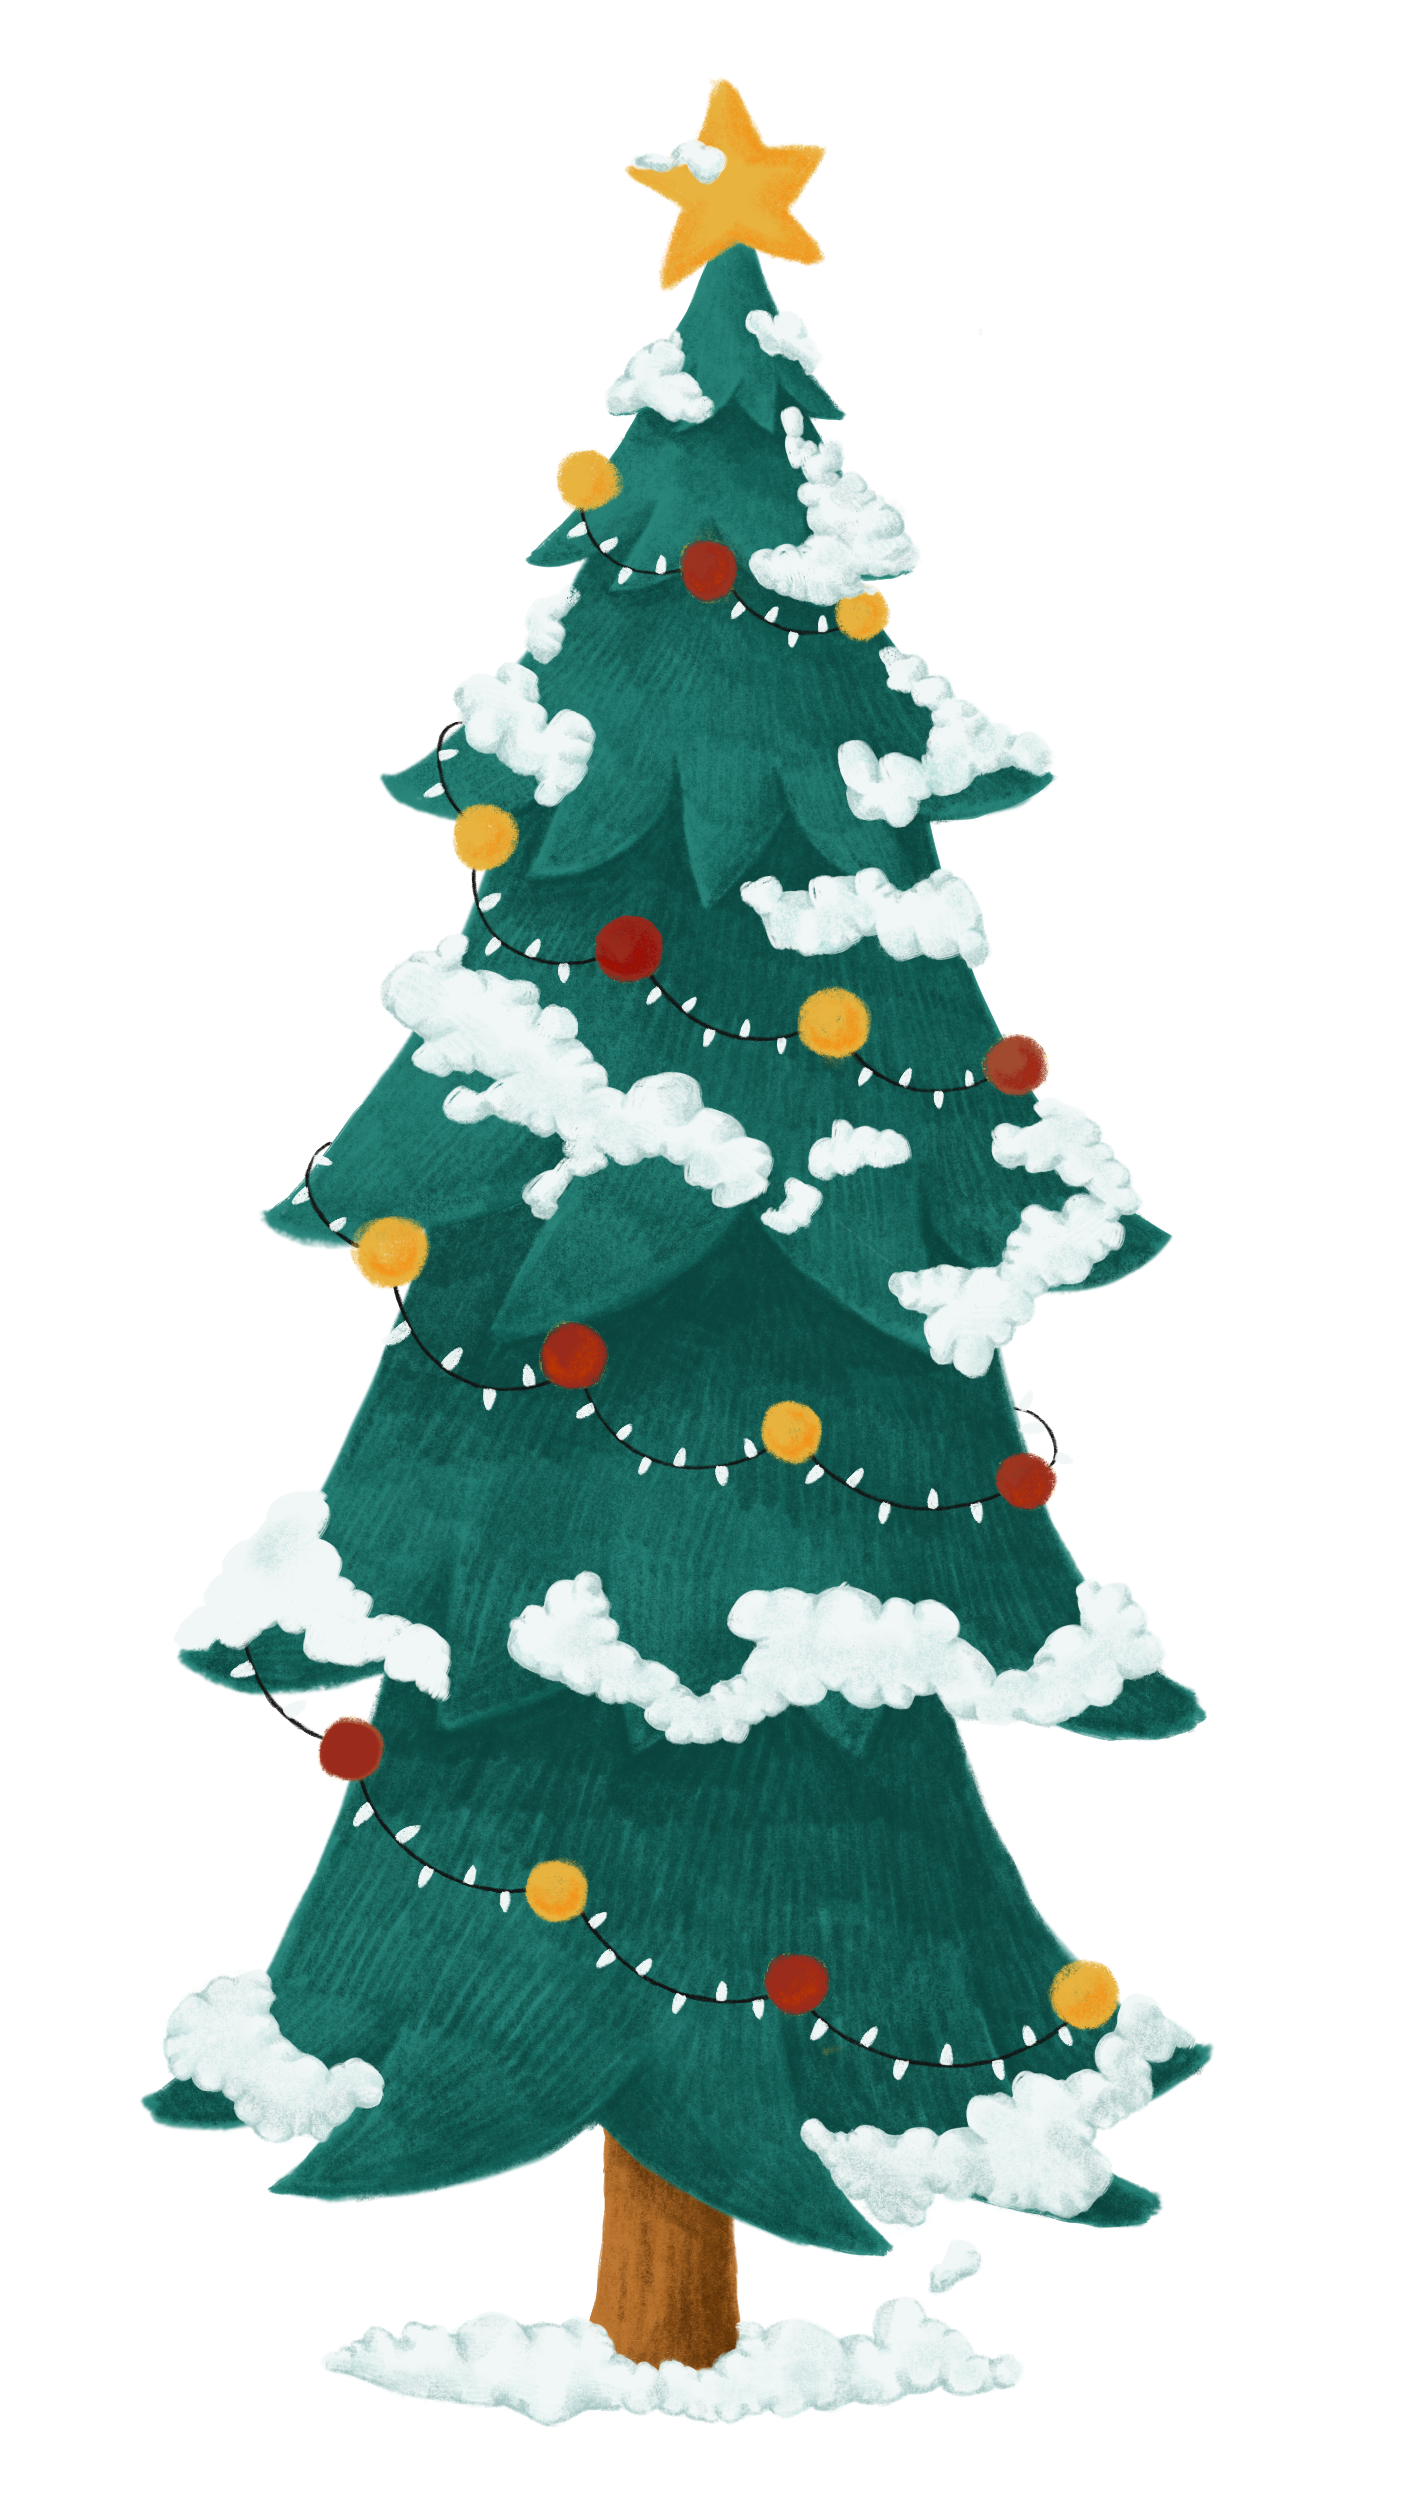 Illustration of a Christmas tree covered in lights and snow.